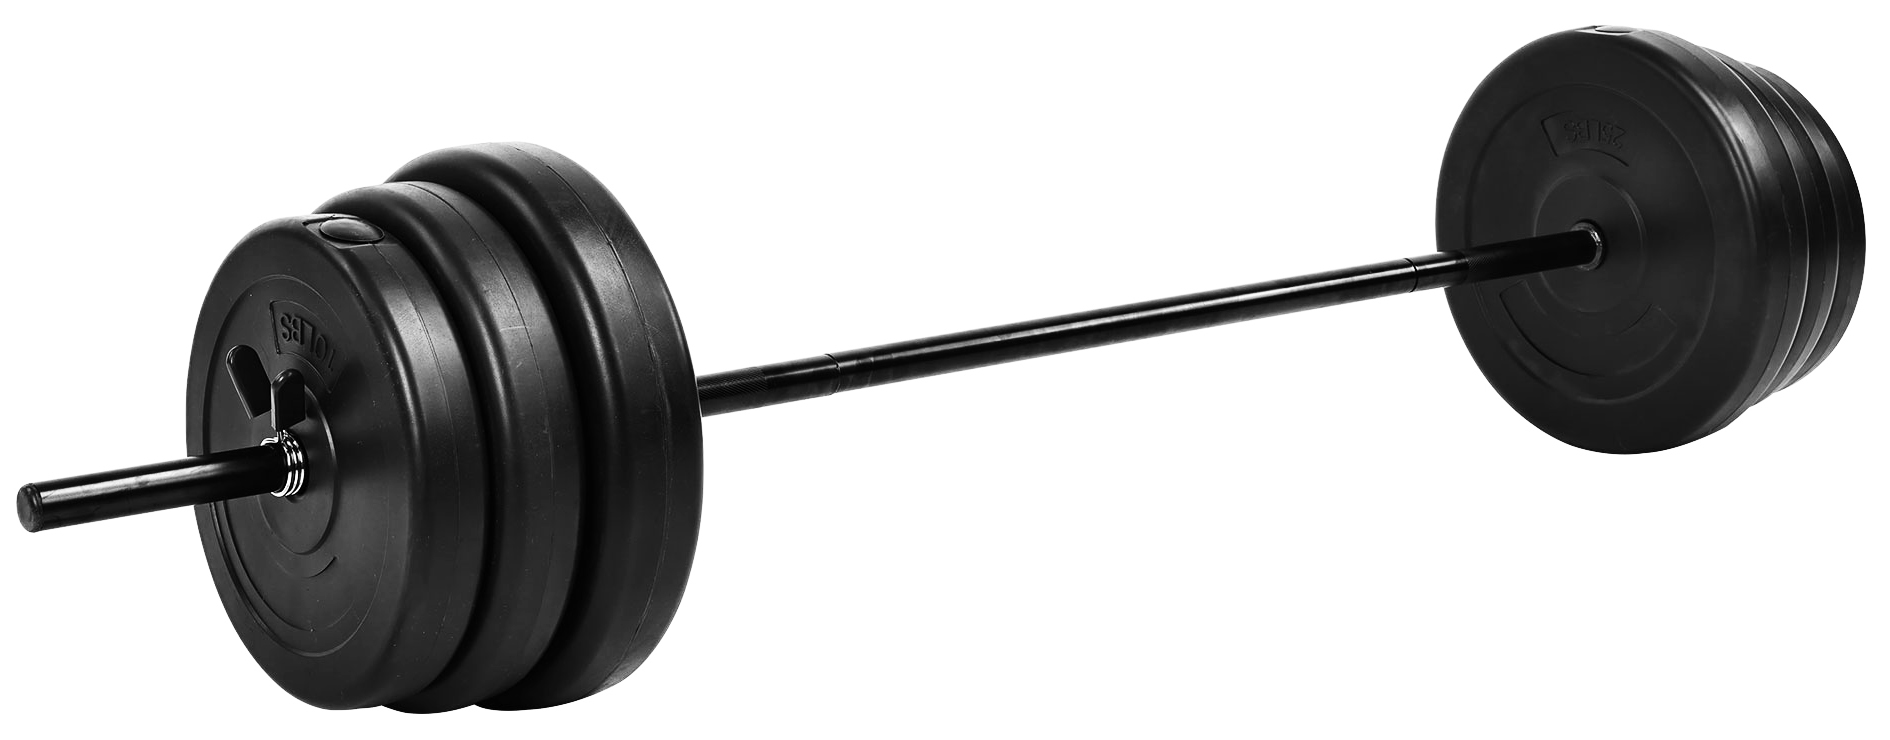 BalanceFrom Vinyl Standard Weight Set in Black, 100 lbs. - image 1 of 5